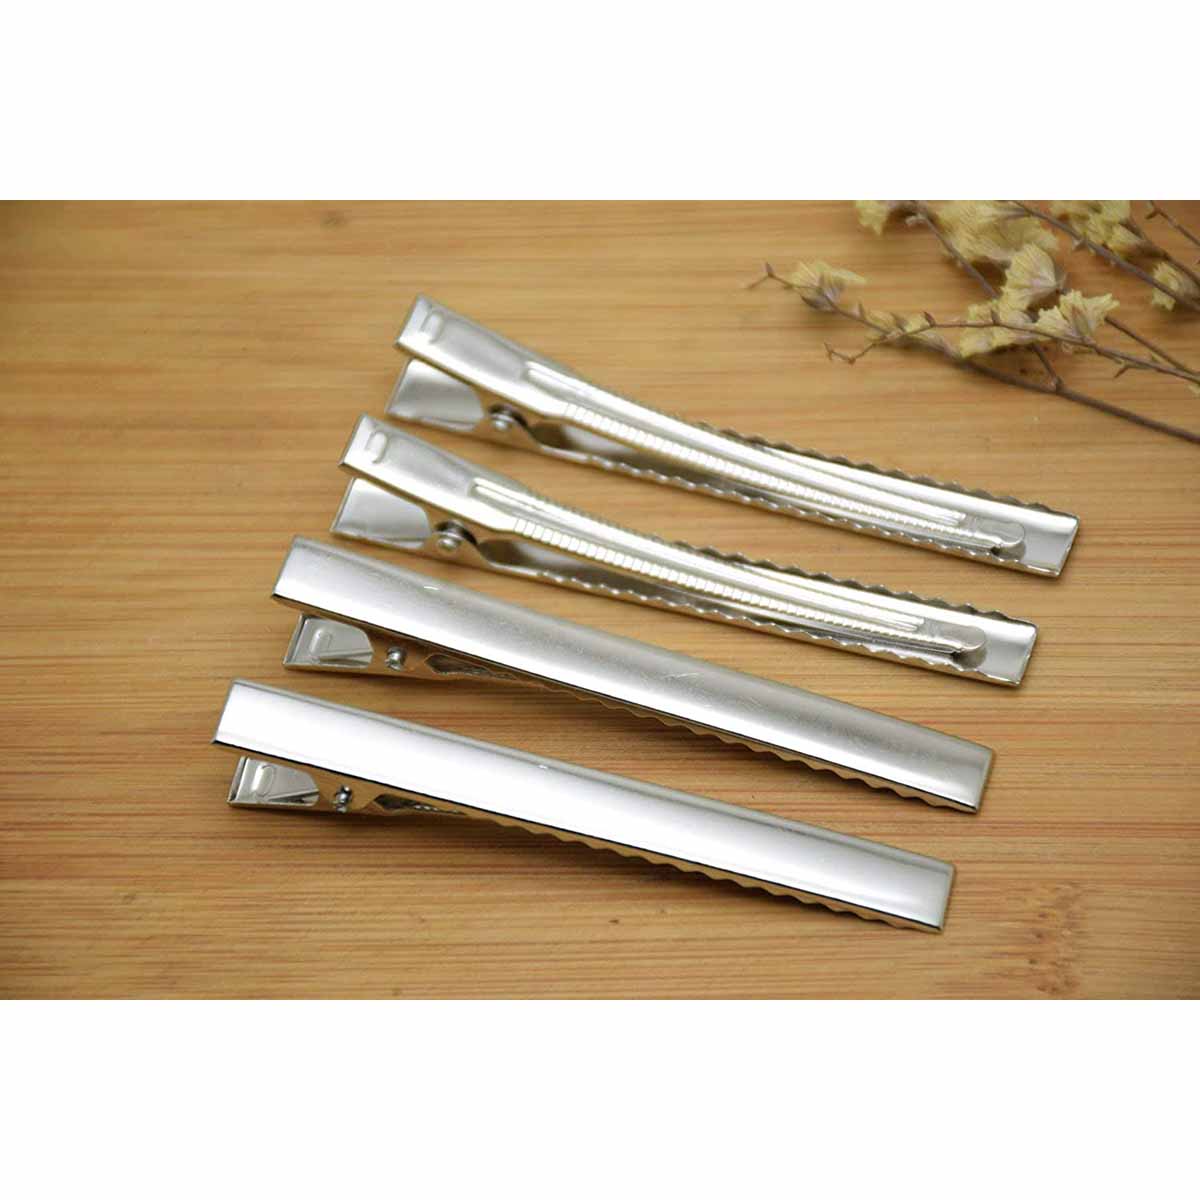 100 rectangle alligator hair clips 45mm-Silver